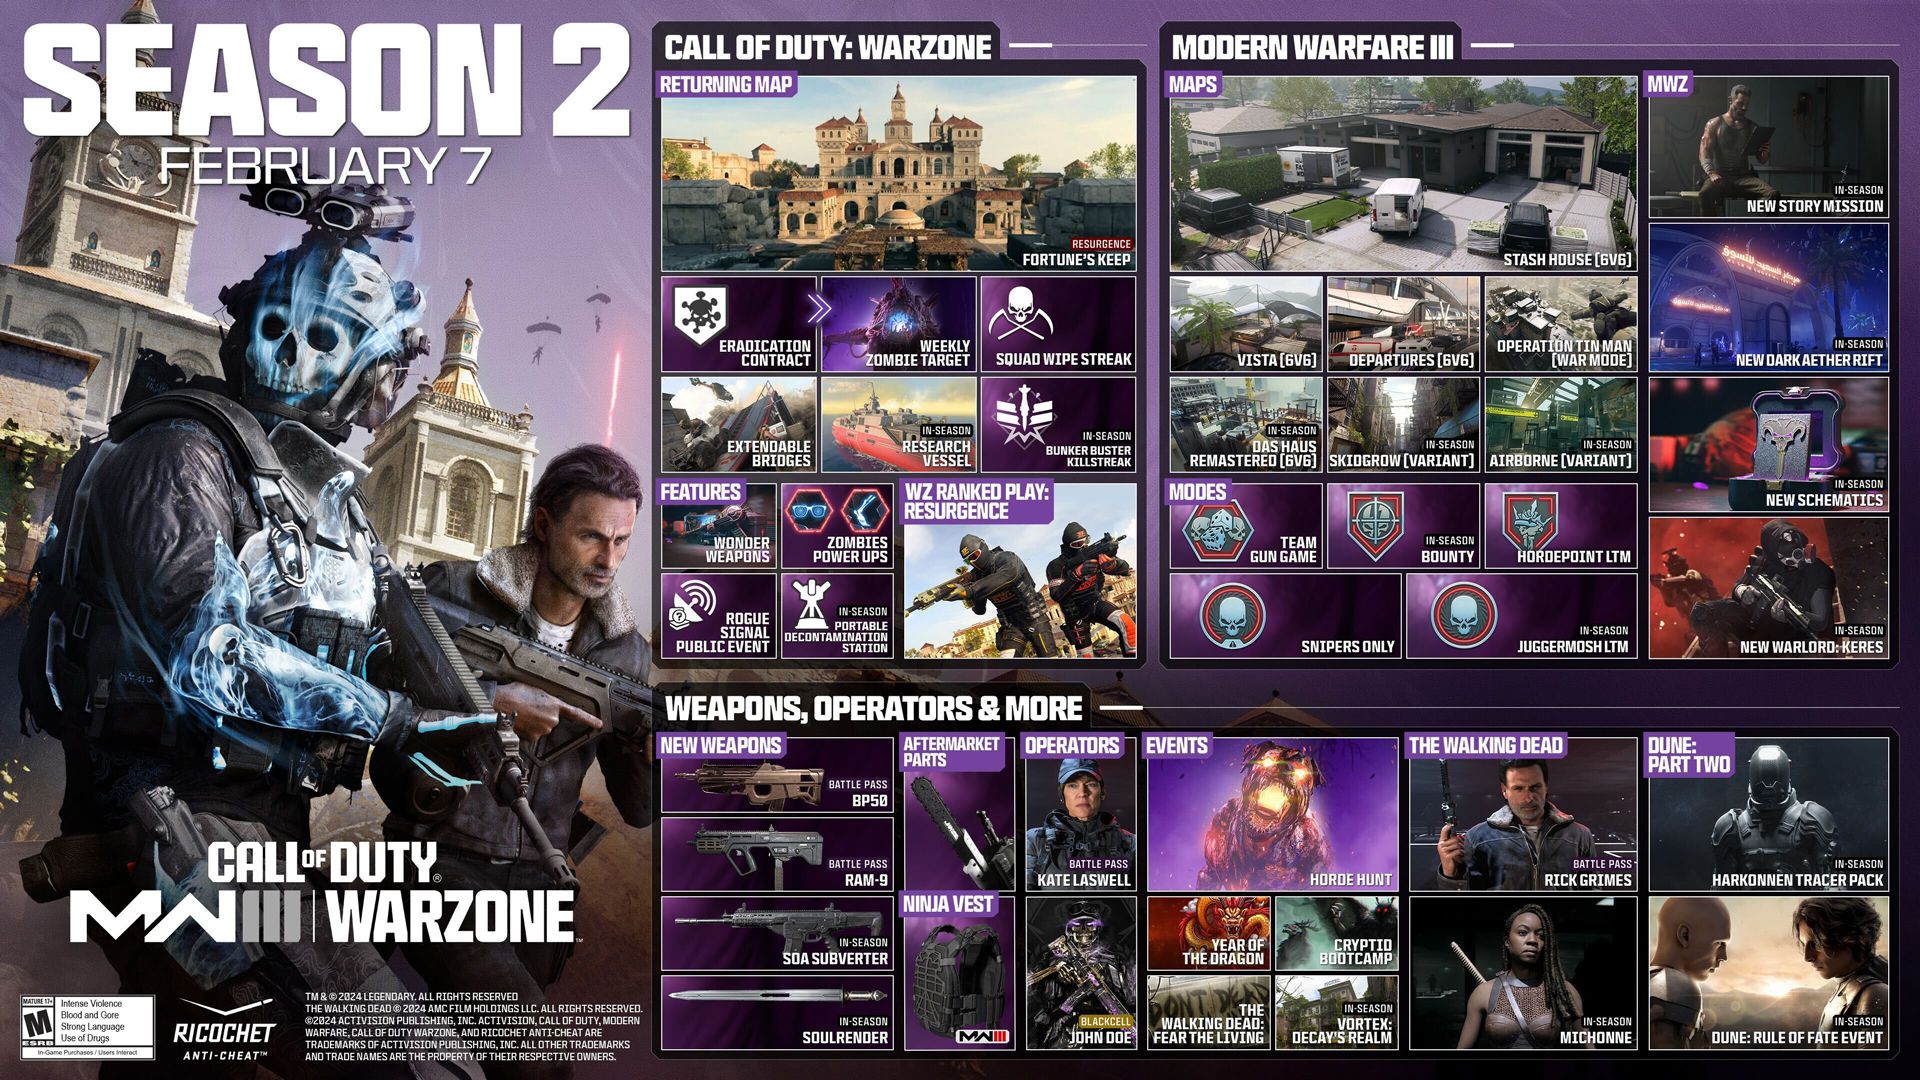 Title: Call of Duty Season 2 Roadmap Unveiled - What to Expect-content-image